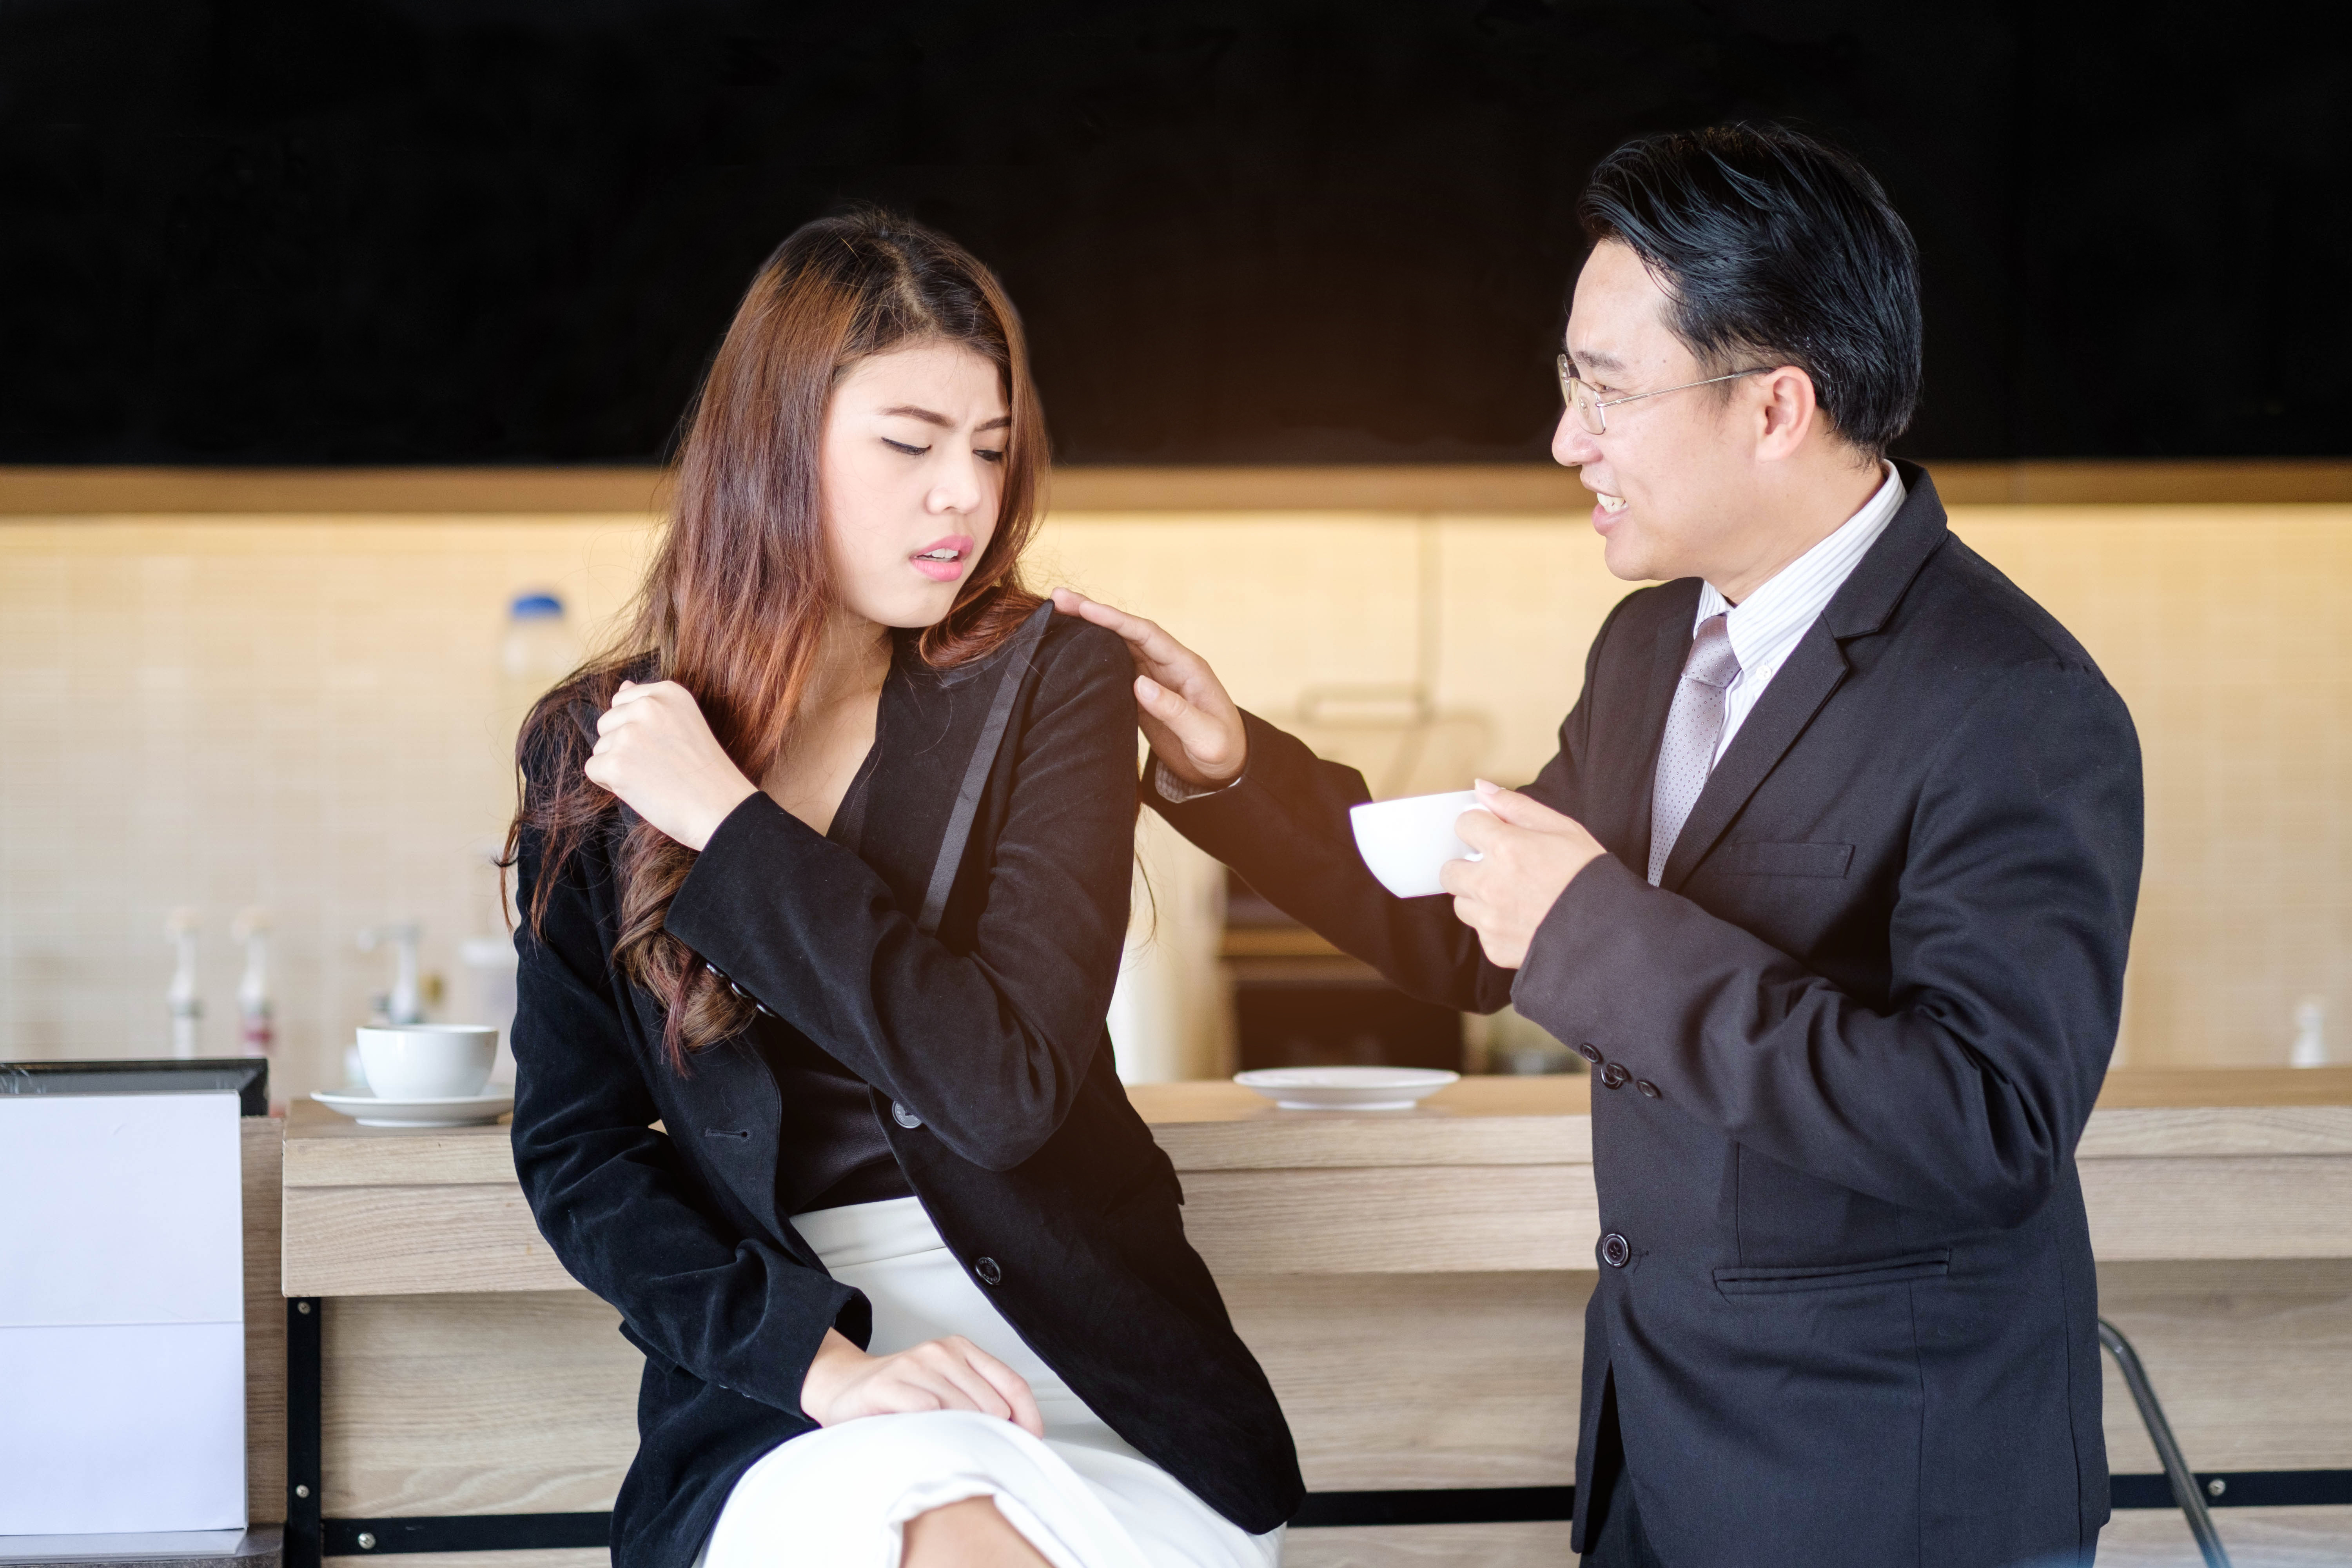 Unlucky in love can mean unlucky at work in China as employers demand dating history from women applicants to prove ‘emotional intelligence’. Picture: Shutterstock